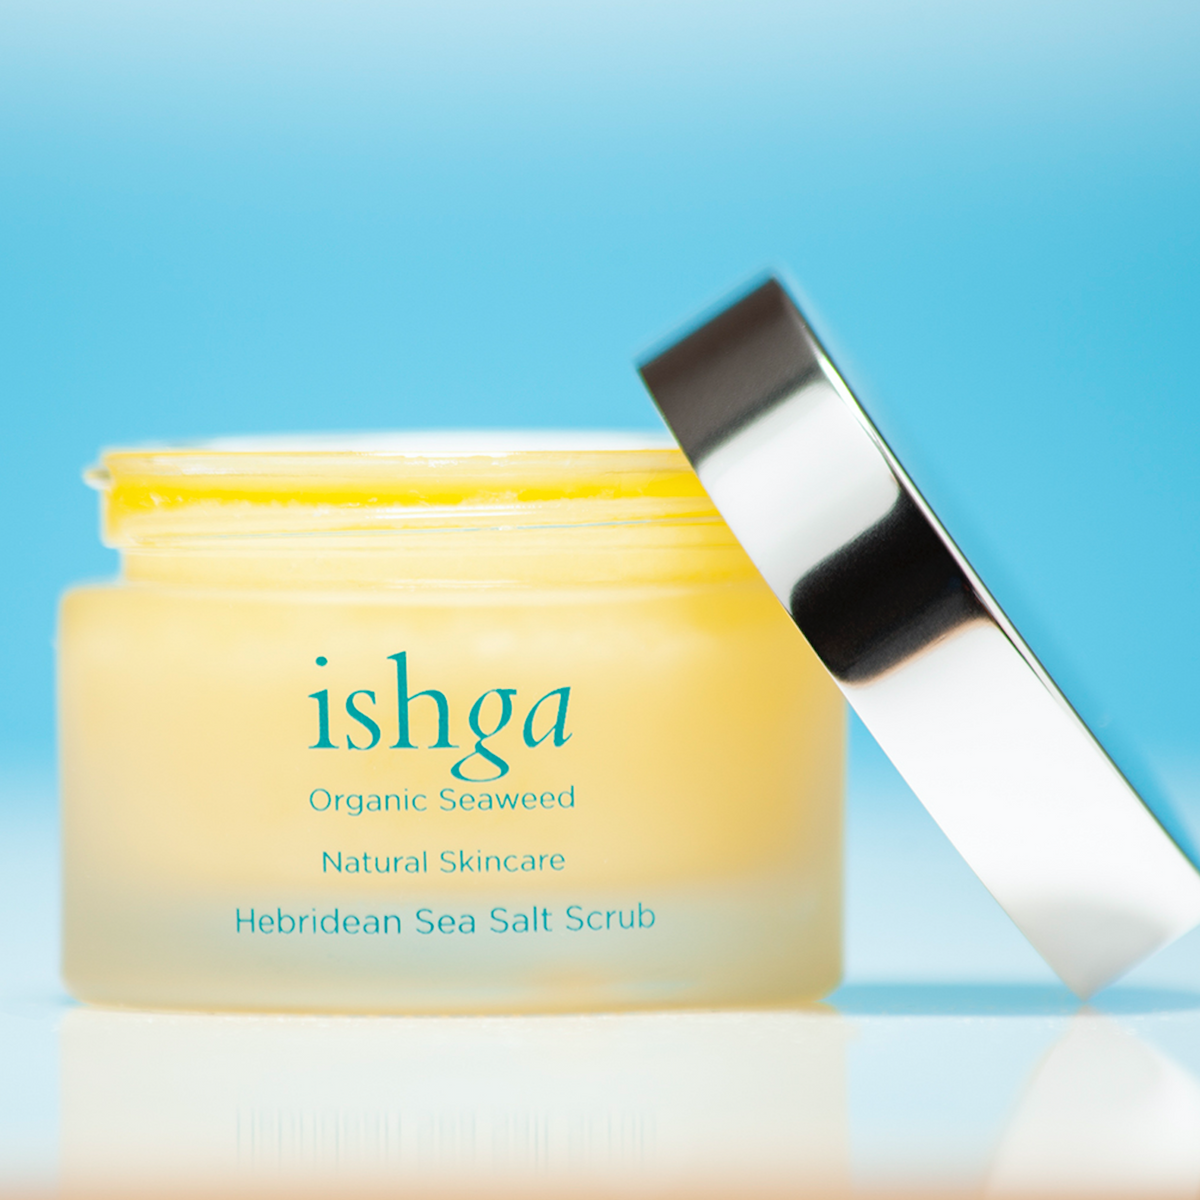 ishga Hebridean Sea Salt Scrub 50ml glass jar opened with lid next to it Seaweed skincare product made with organic ingredients, vegan and cruelty free, made in Scotland 